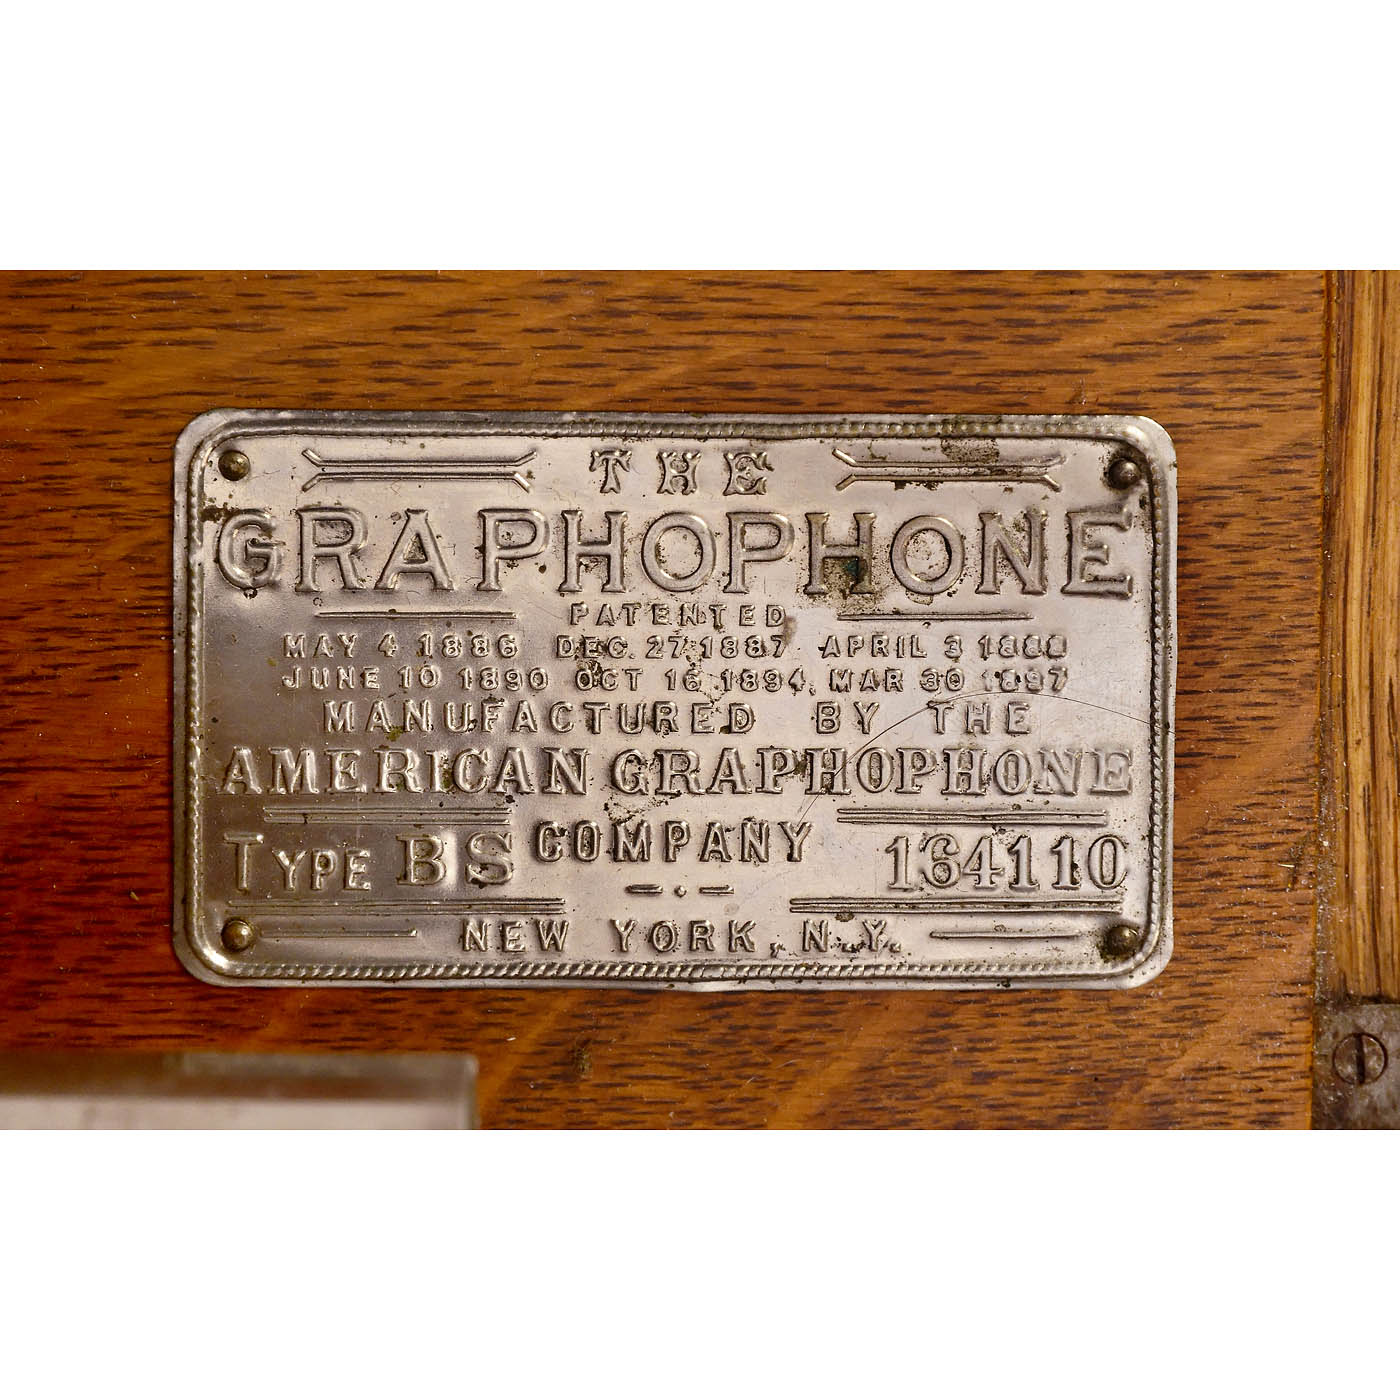 5-Cent Columbia Graphophone Model BS Coin-Operated Phonograph, c. 1898 - Image 4 of 4